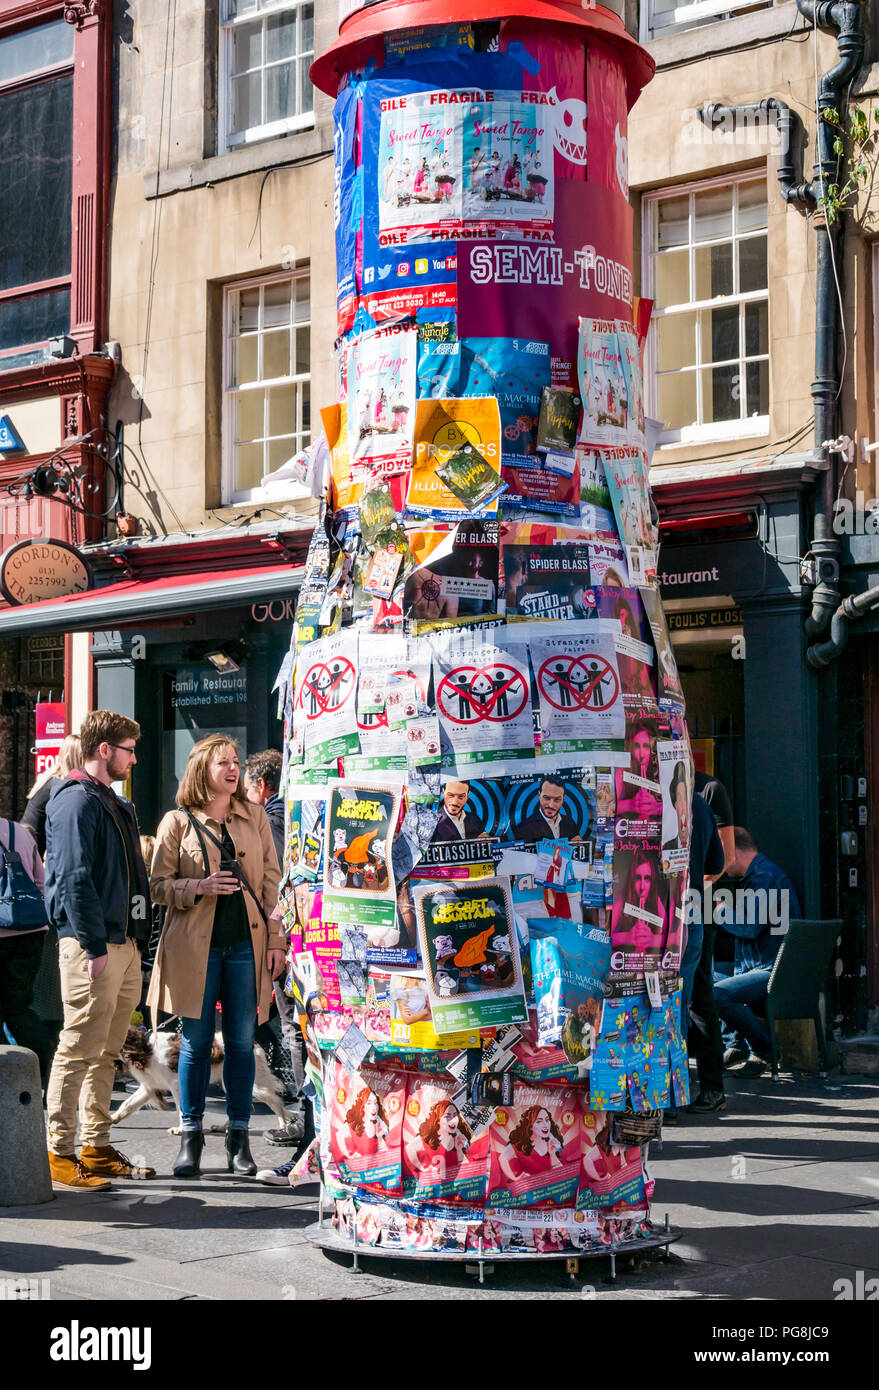 Edinburgh Fringe Festival, Edinburgh, Scotland, UK. 24th August 2018.  The sun shines on Fringe goers at the Virgin Money sponsored street venue on the Royal Mile. The temporary poles for fringe posters grow fatter as the weeks go by as Fringe performers paste posters on top of each other Stock Photo